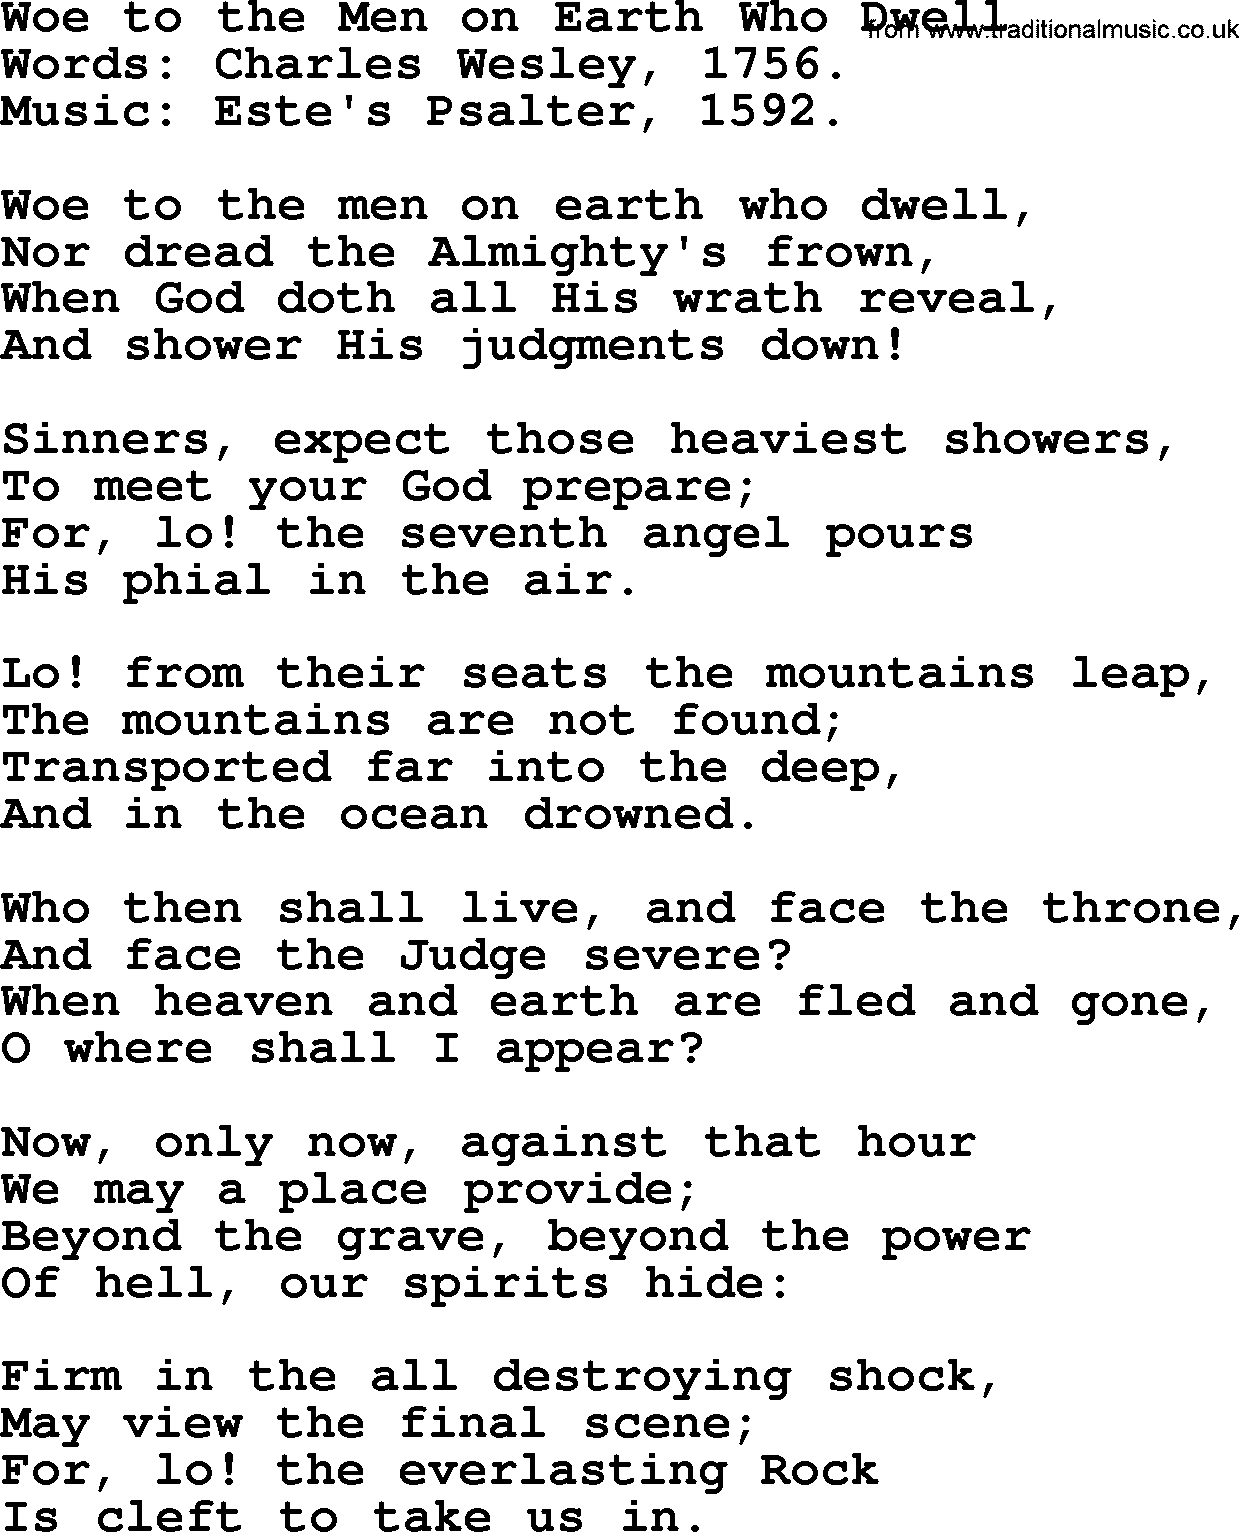 Hymns about Angels, Hymn: Woe To The Men On Earth Who Dwell.txt lyrics with PDF